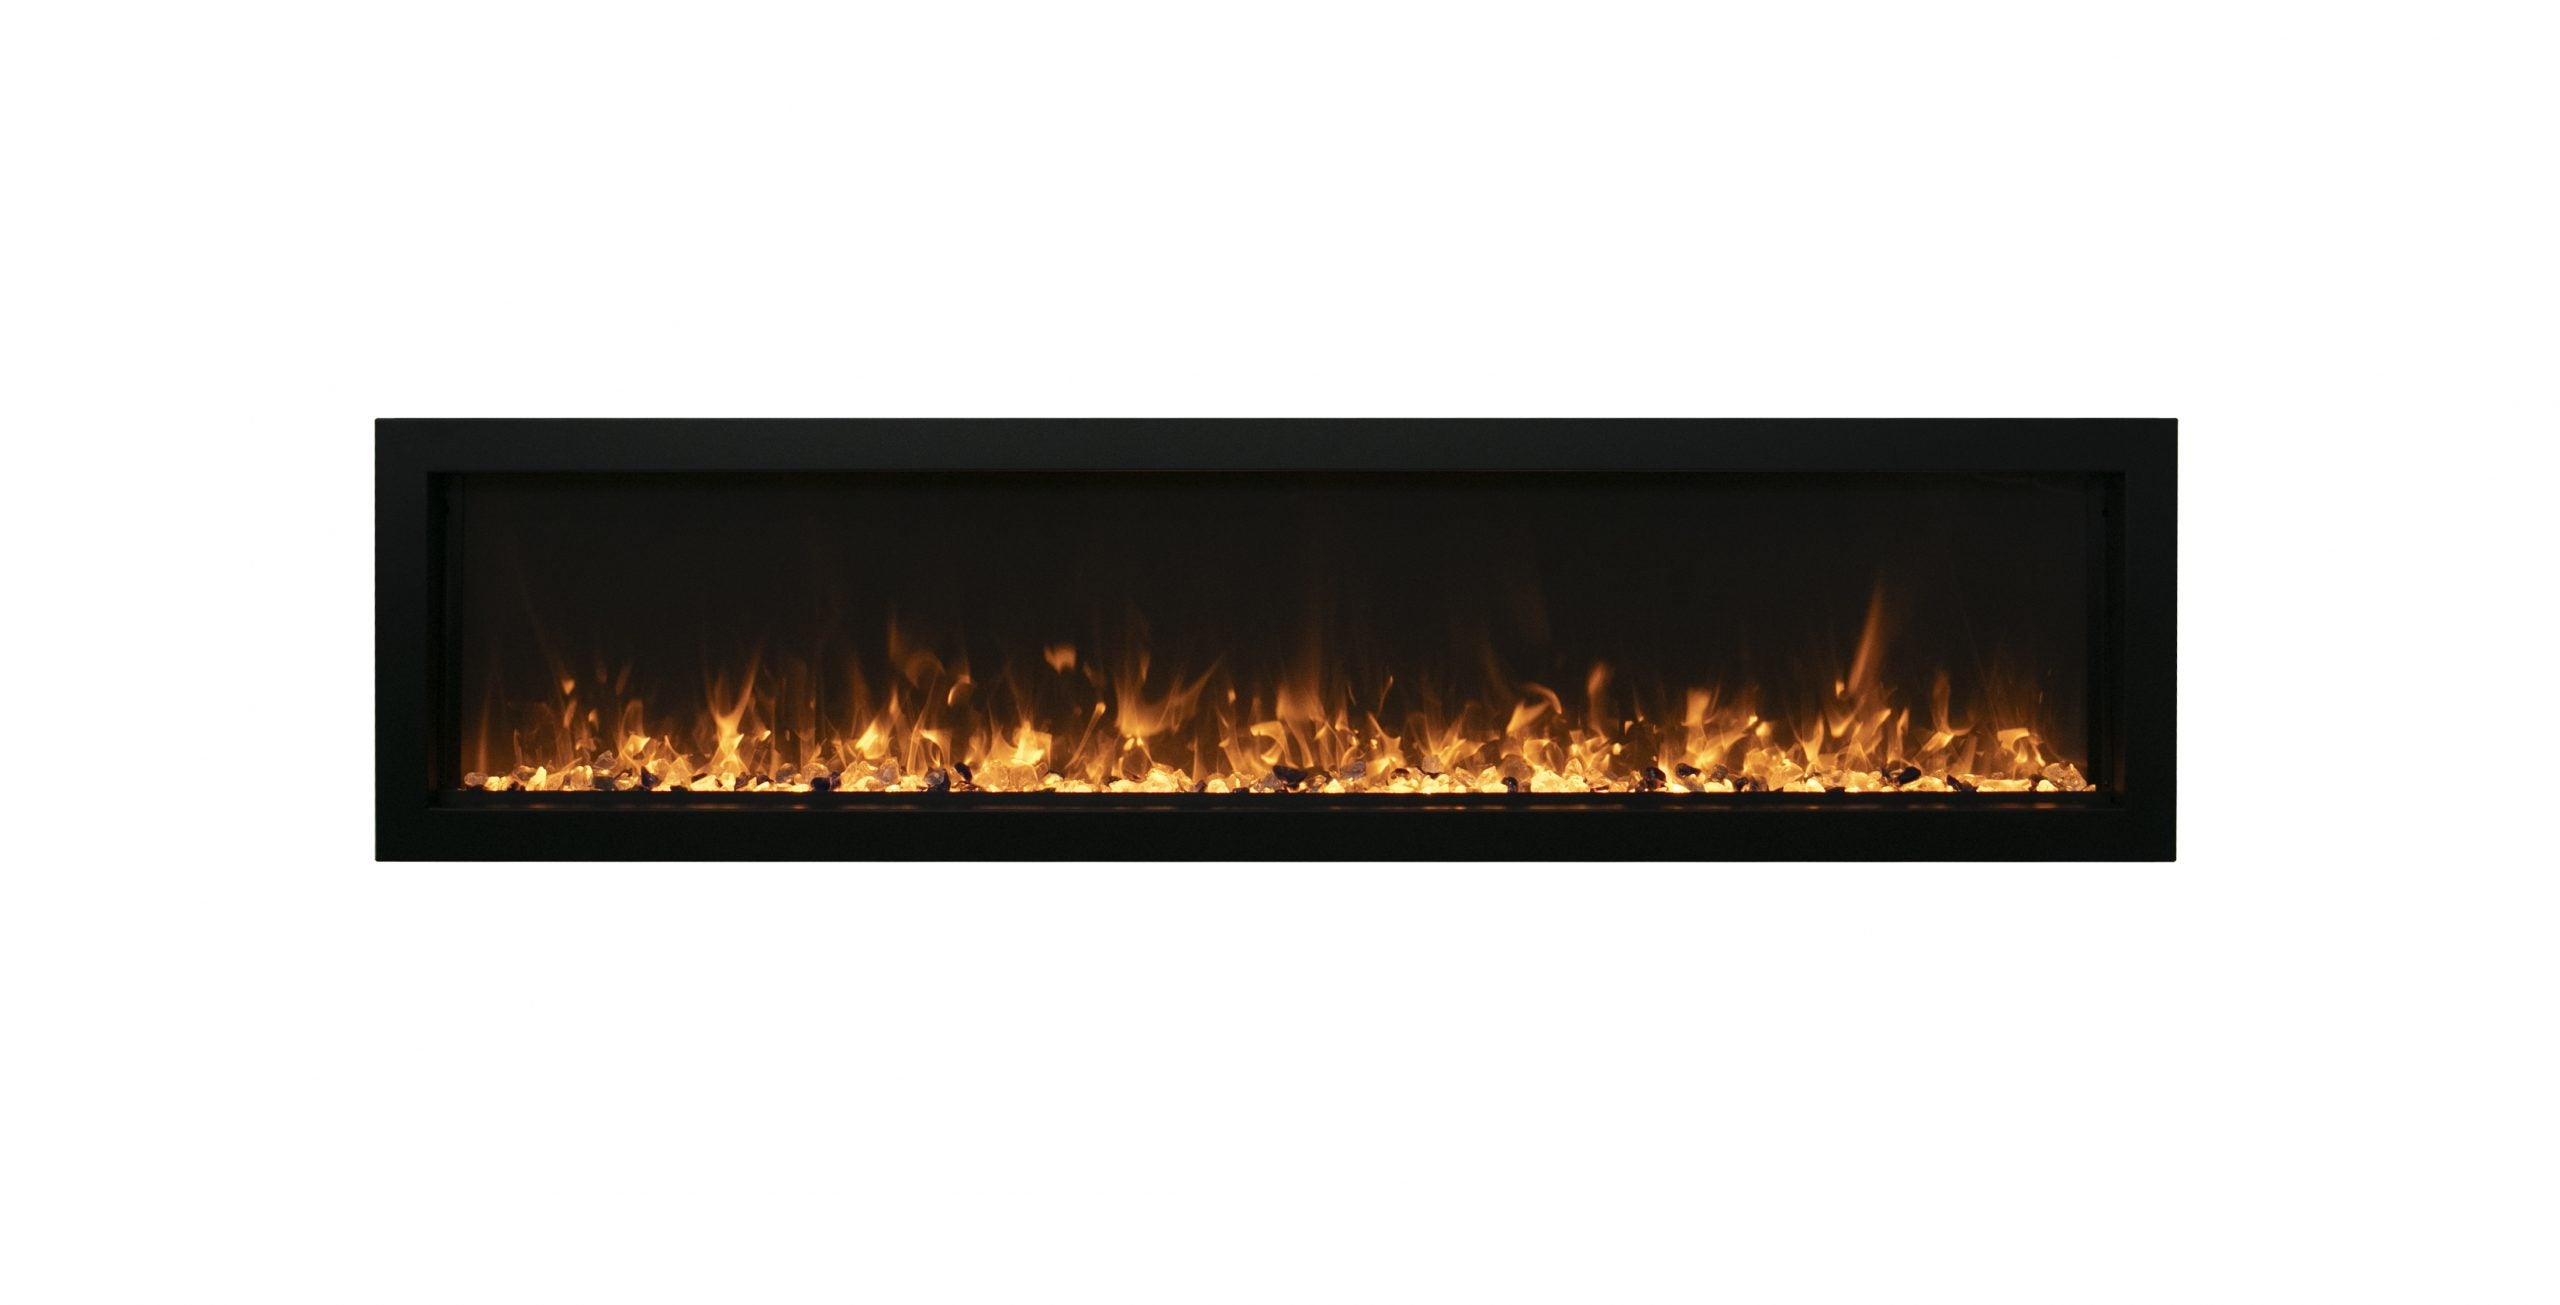 Remii Extra Slim Electric Fireplace